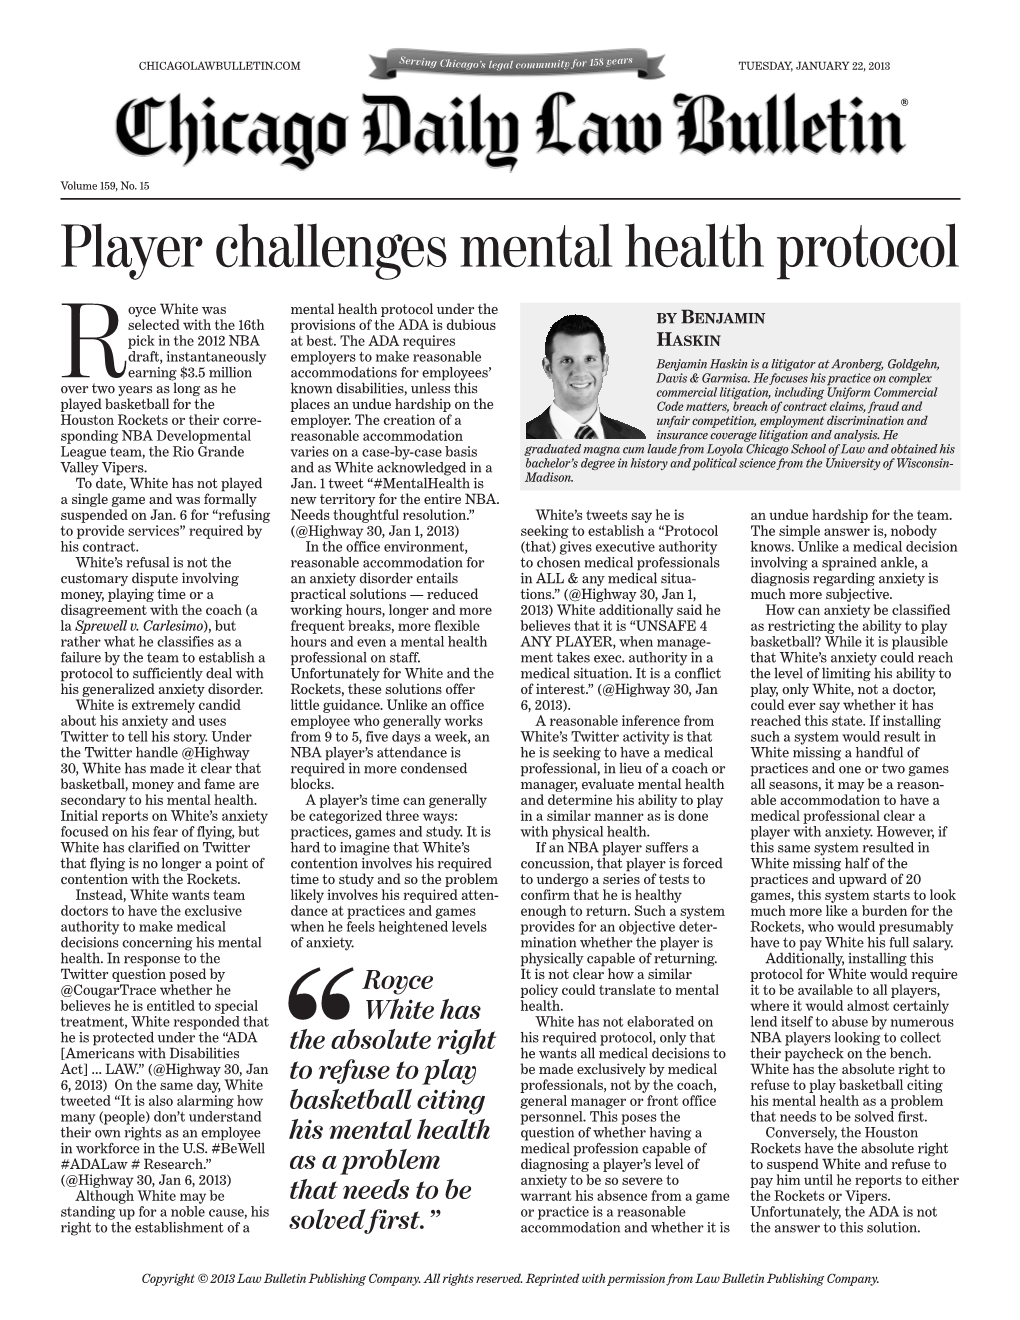 Player Challenges Mental Health Protocol